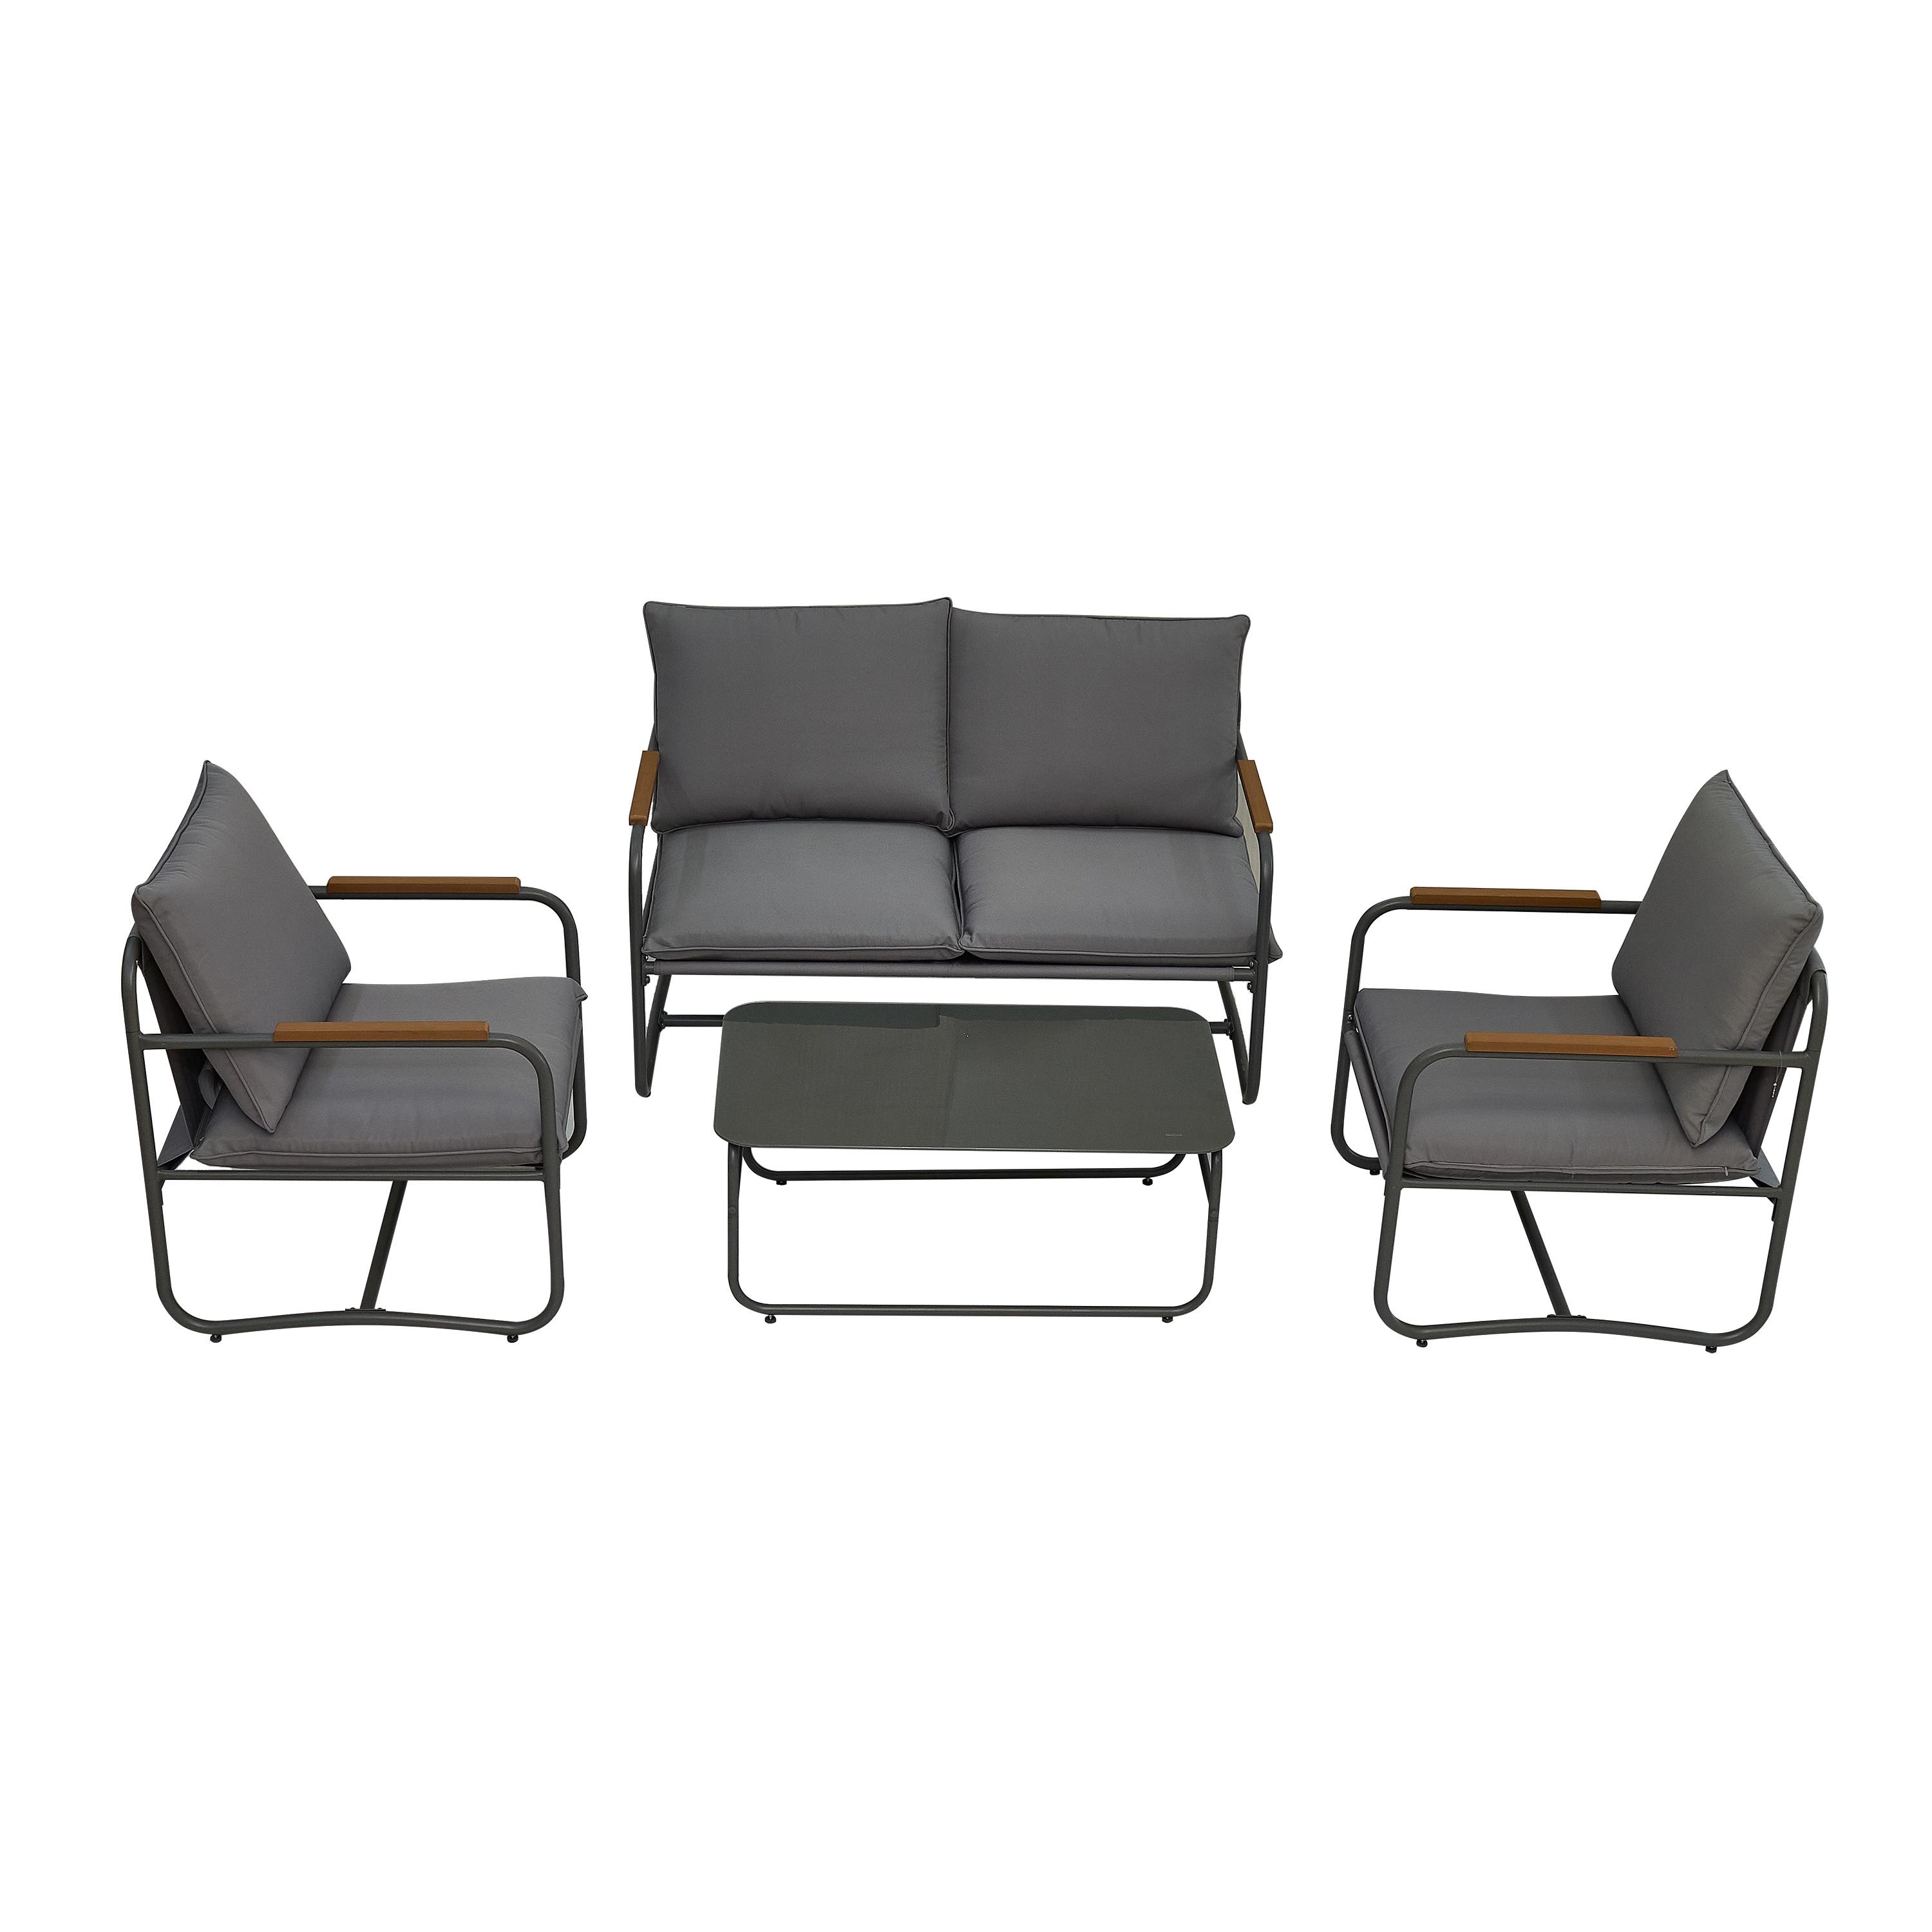 Syngar 4 Piece Patio Furniture Sets, Sectional Furniture Set for Outside, Conversation Sofa Set with Coffee Table and Dark Gray Cushions, Outdoor All Weather Metal Chairs Set for Yard, Poolside, Deck - image 2 of 7